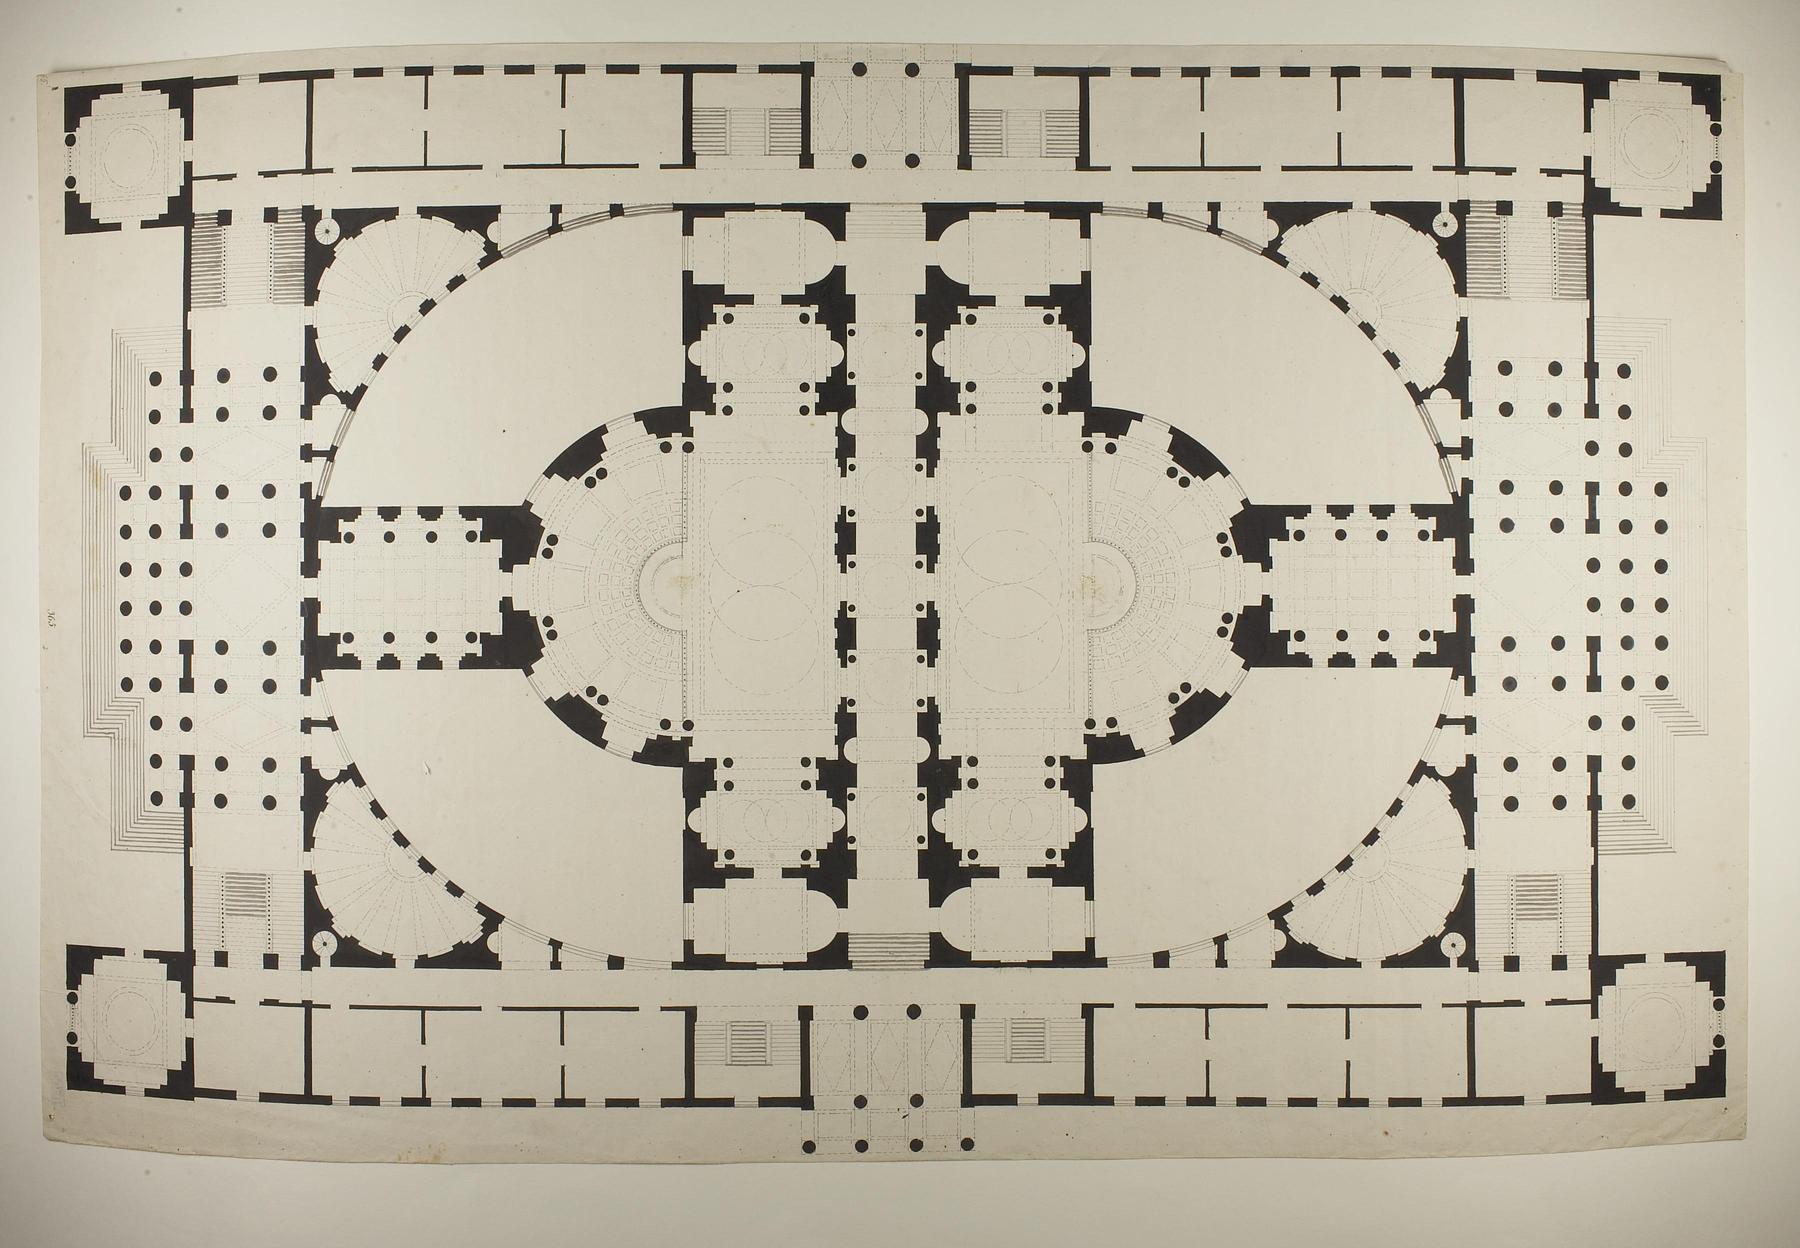 Project for City Hall and Court House in Roman Style, Ground Plan, D853